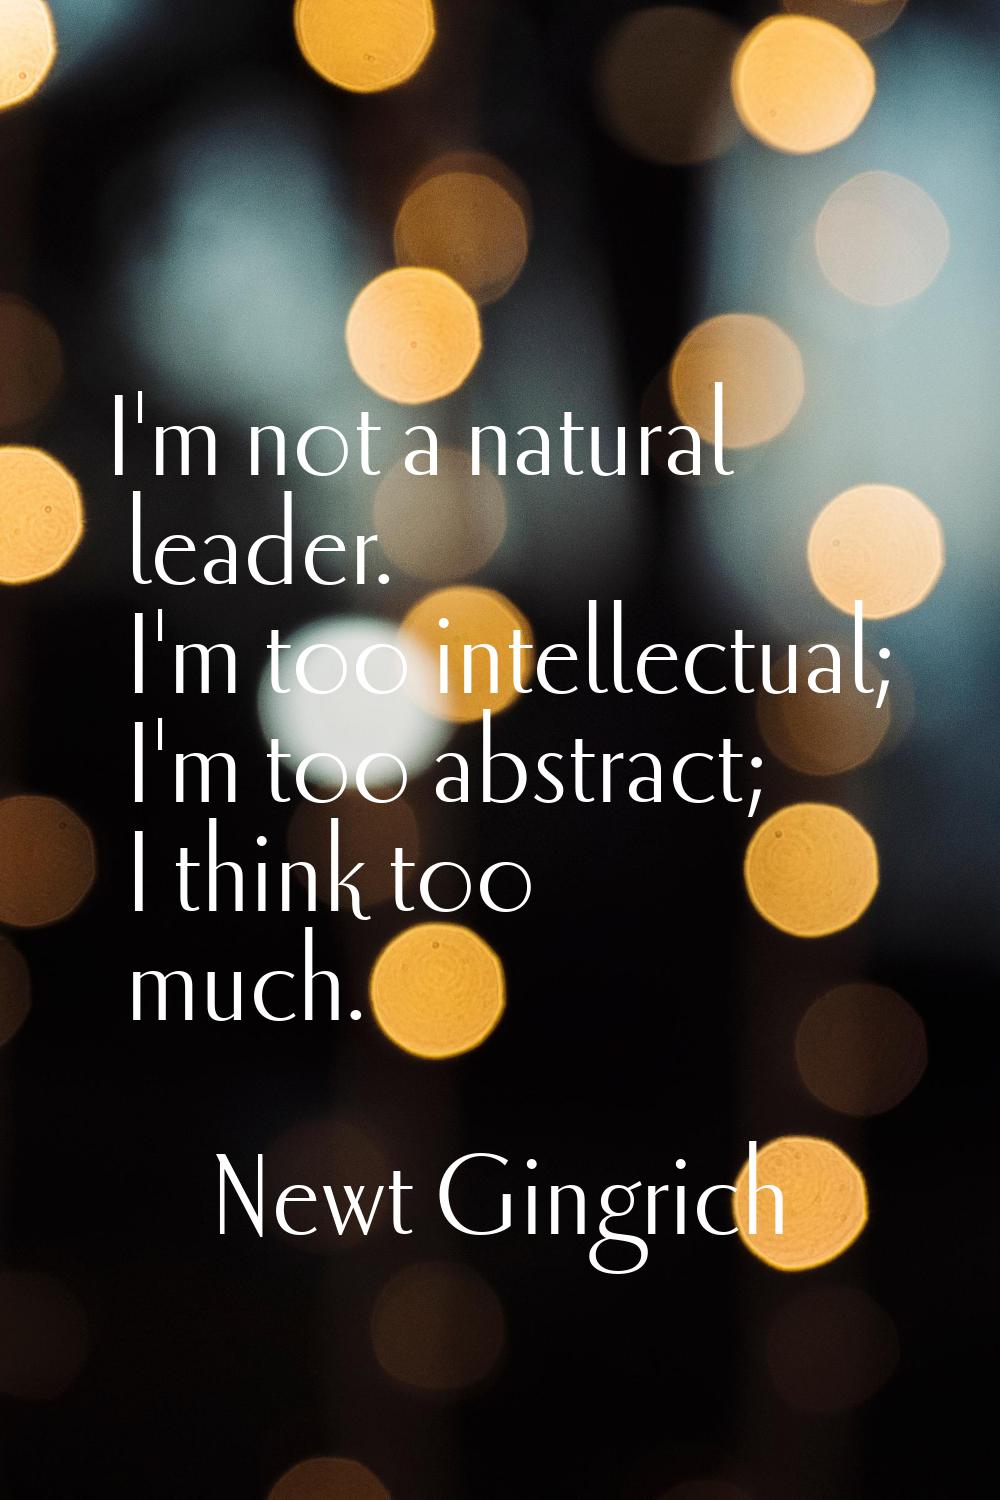 I'm not a natural leader. I'm too intellectual; I'm too abstract; I think too much.